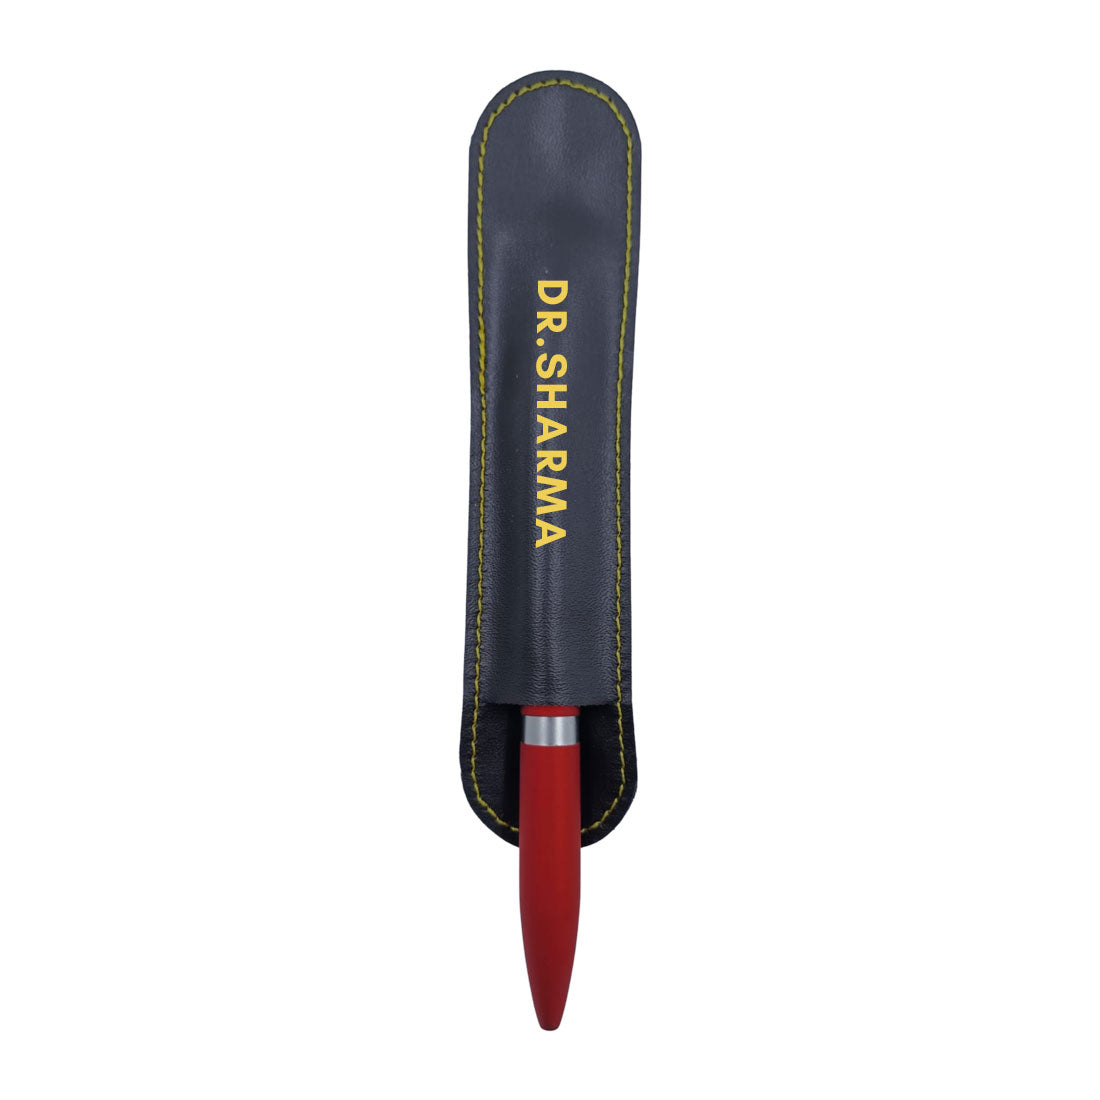 Engraved Personalised Pens for Doctors Unique gift for Doctor (Red) - Dr Add Name